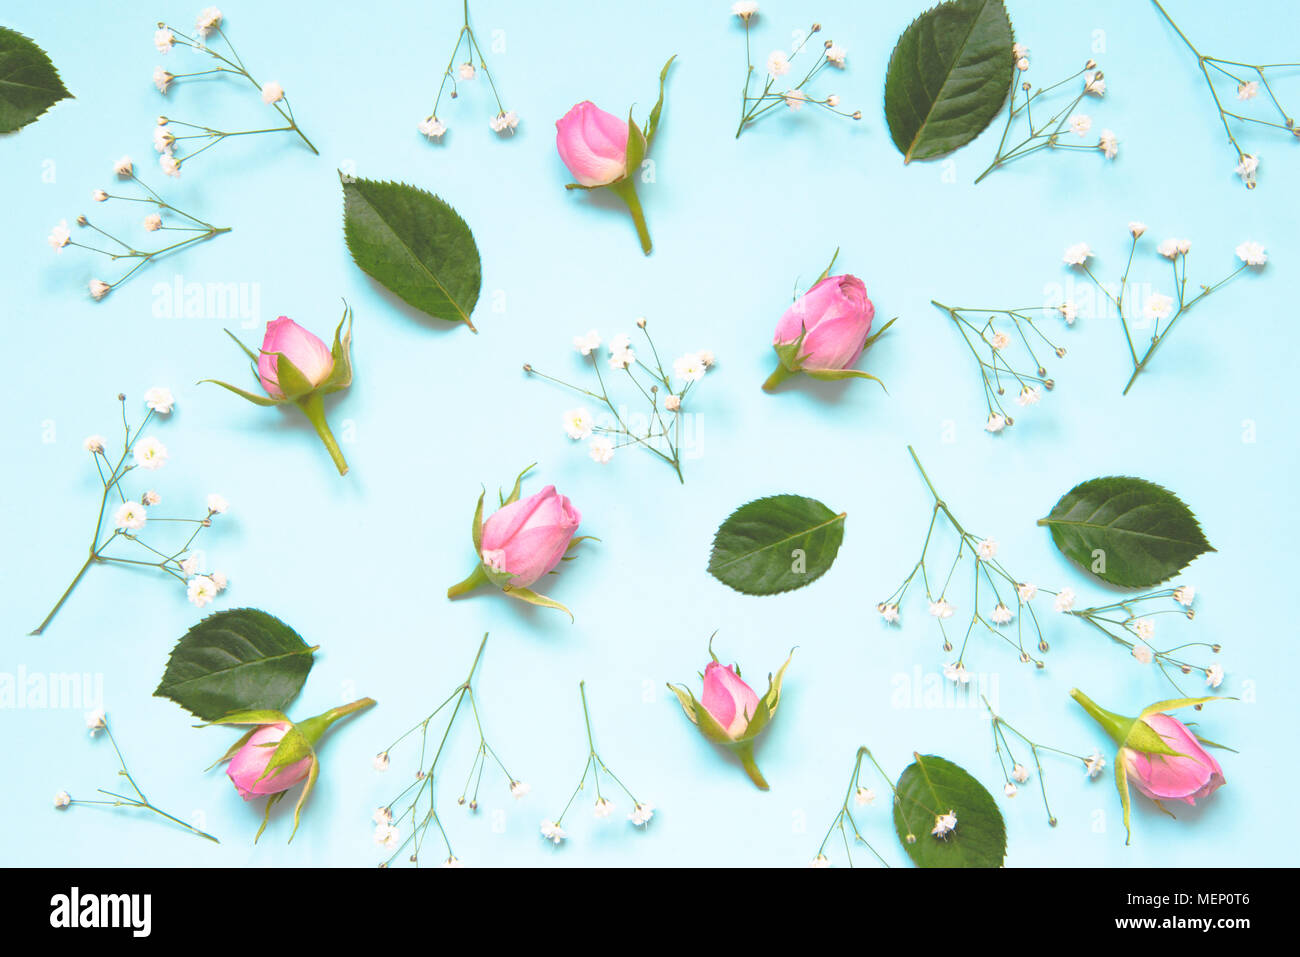 Top view of pink roses and green leaves over blue background. Abstract floral background. Stock Photo